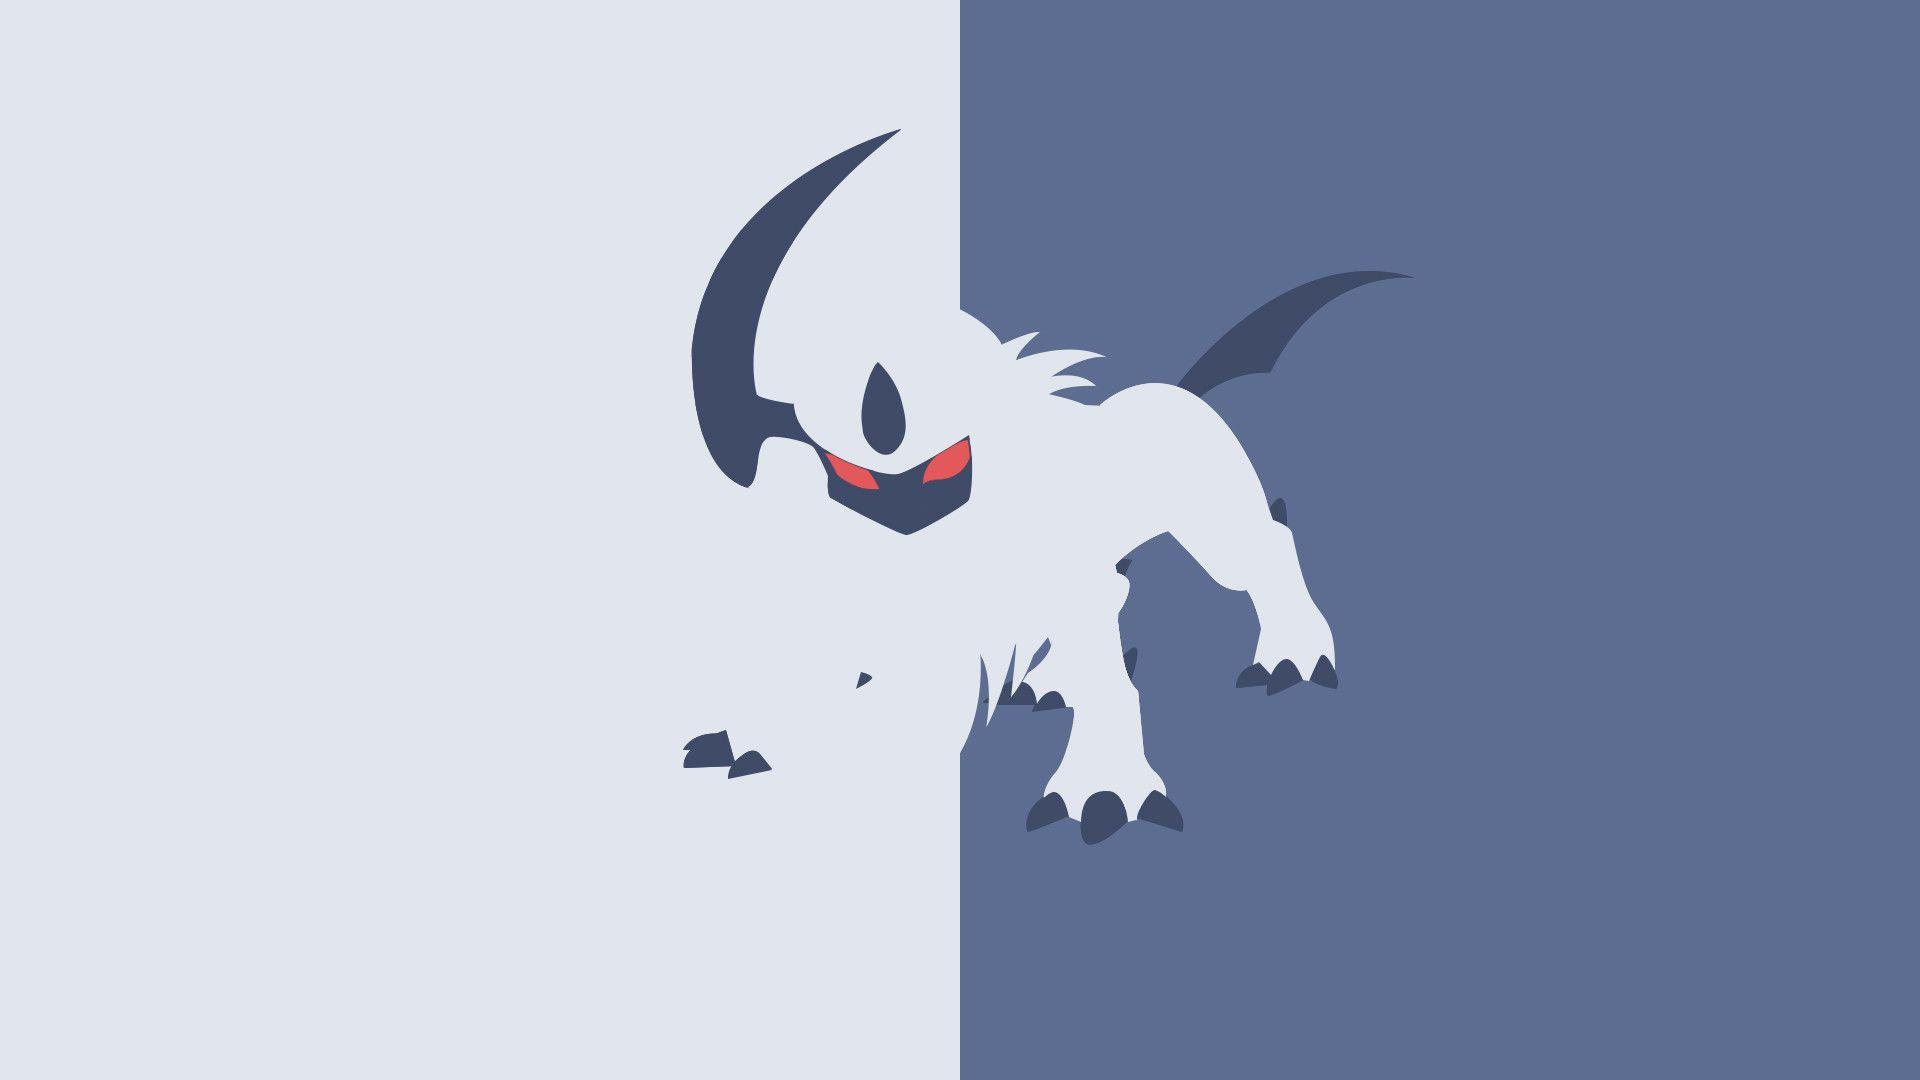 Shiny Absol Wallpapers ·①